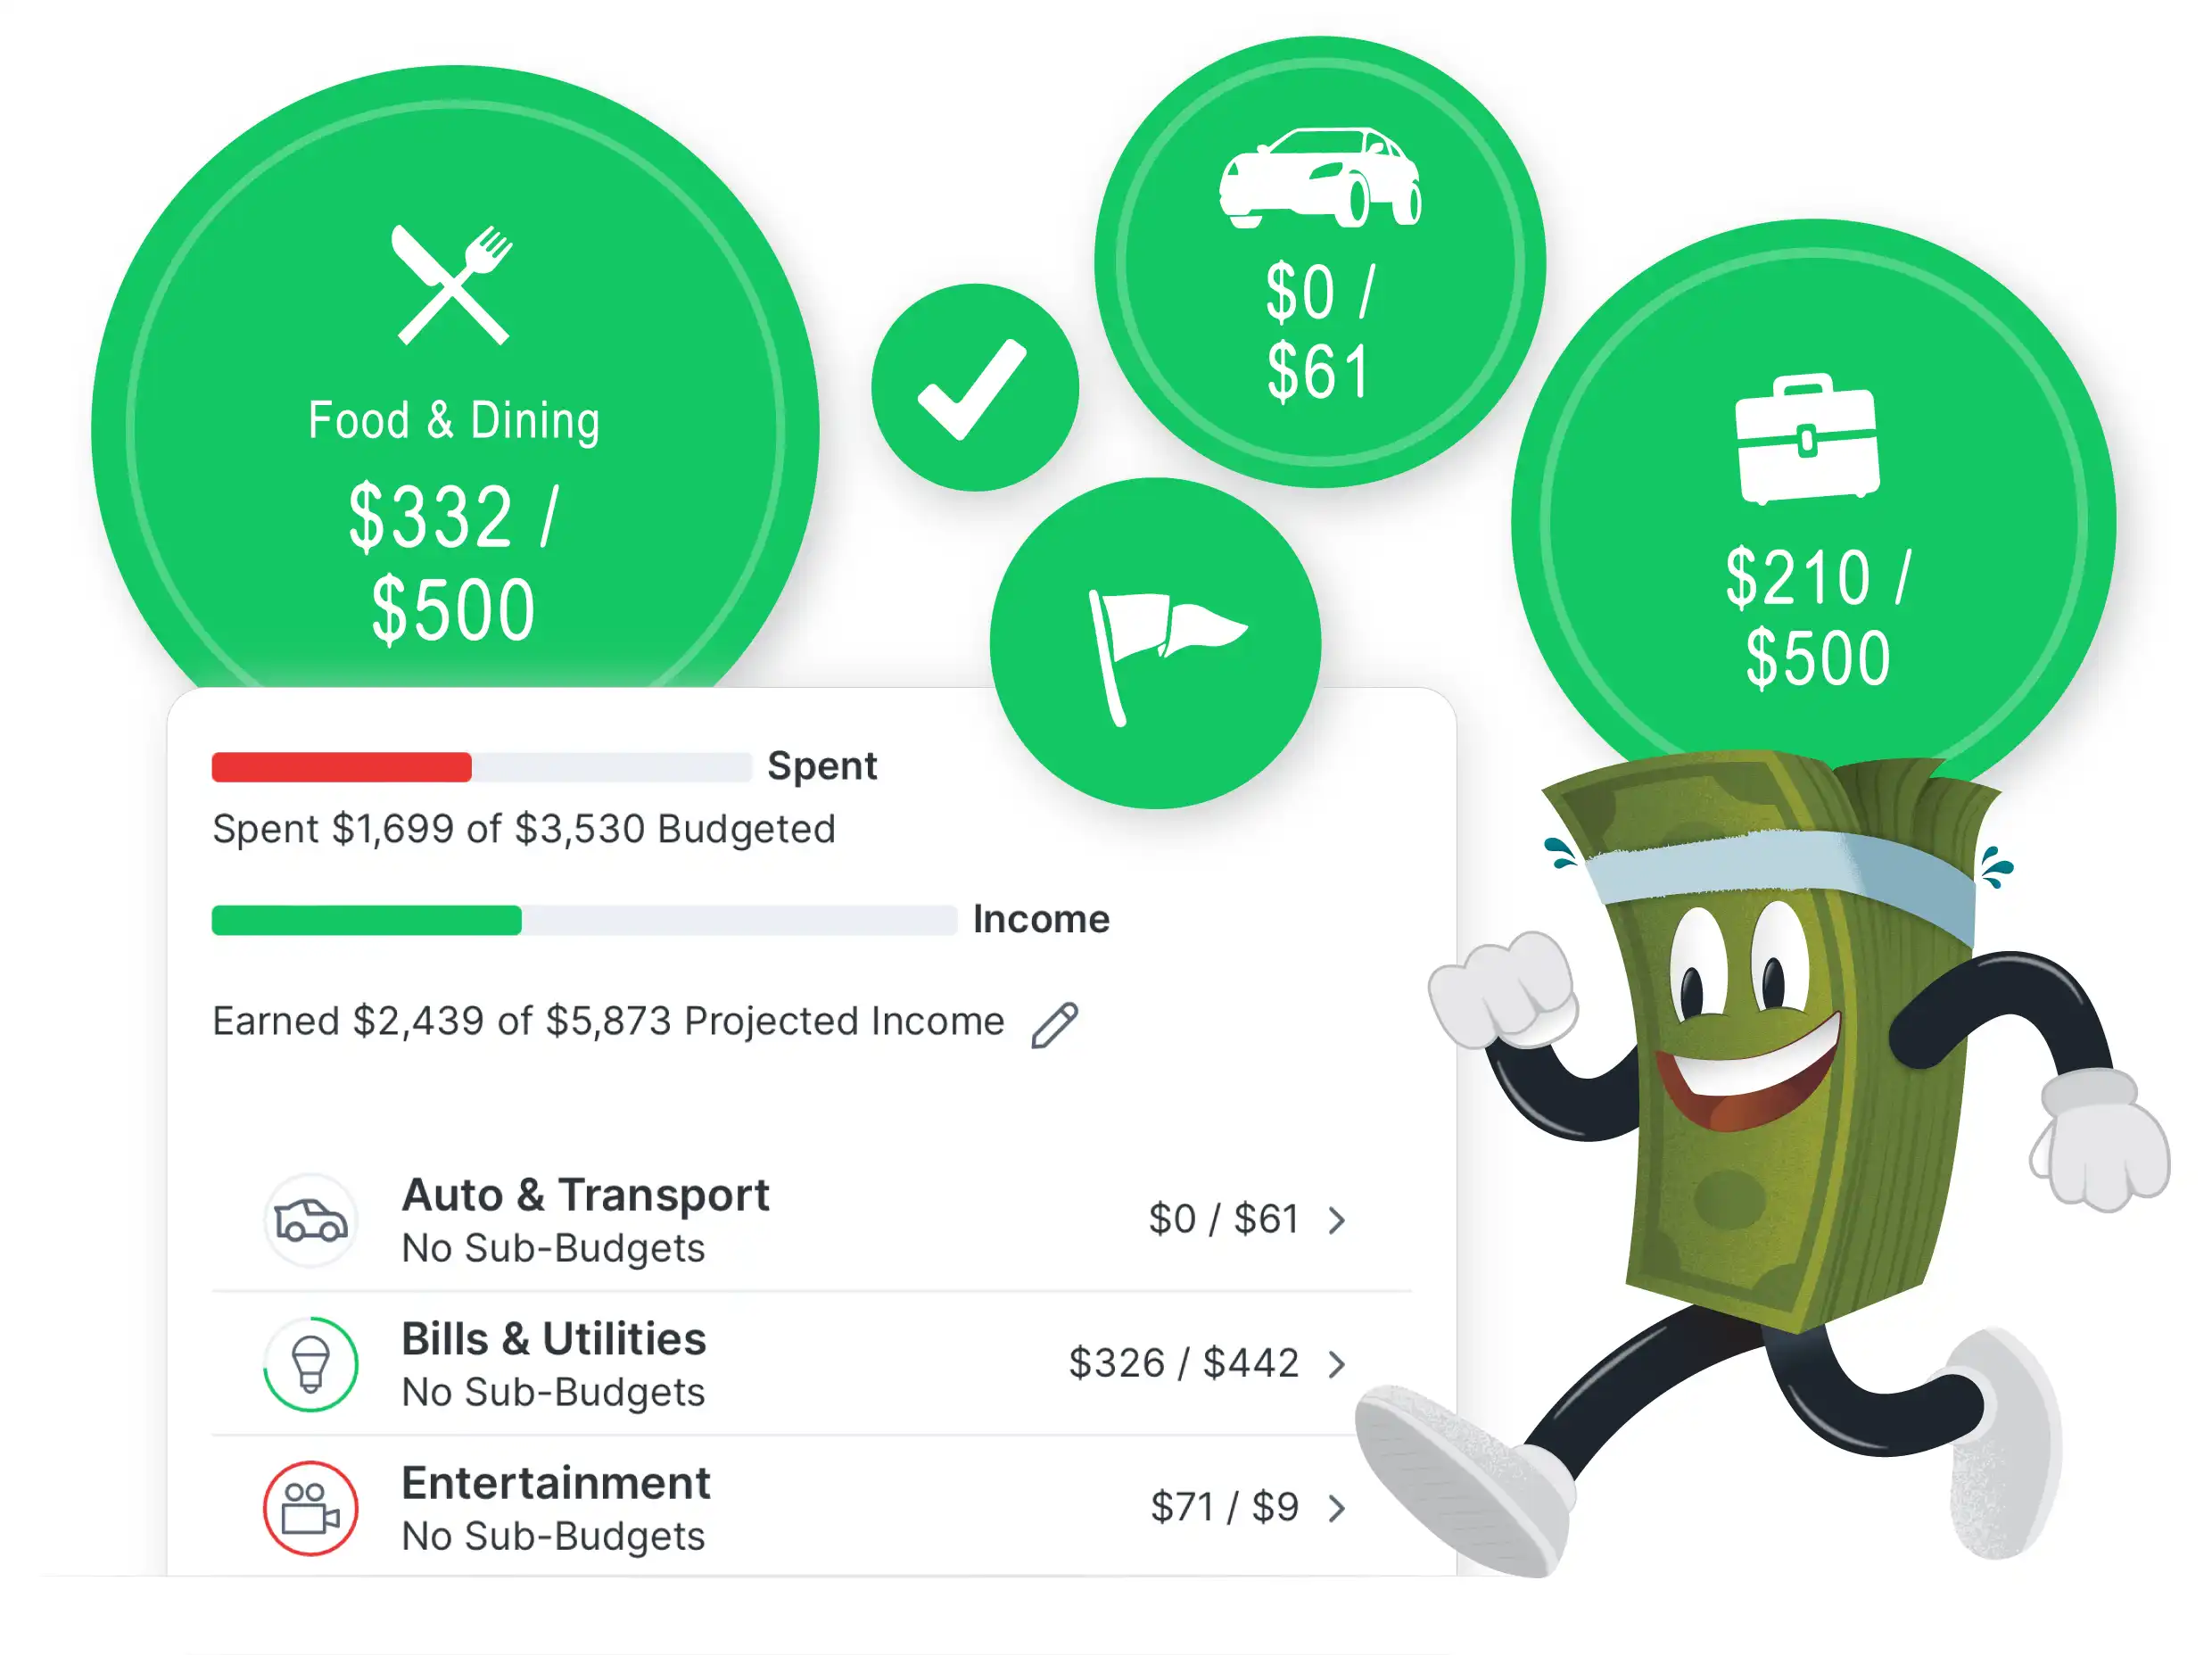 Image of various budgets in green bubbles and a mockup of a money tracker budget list with a money character running